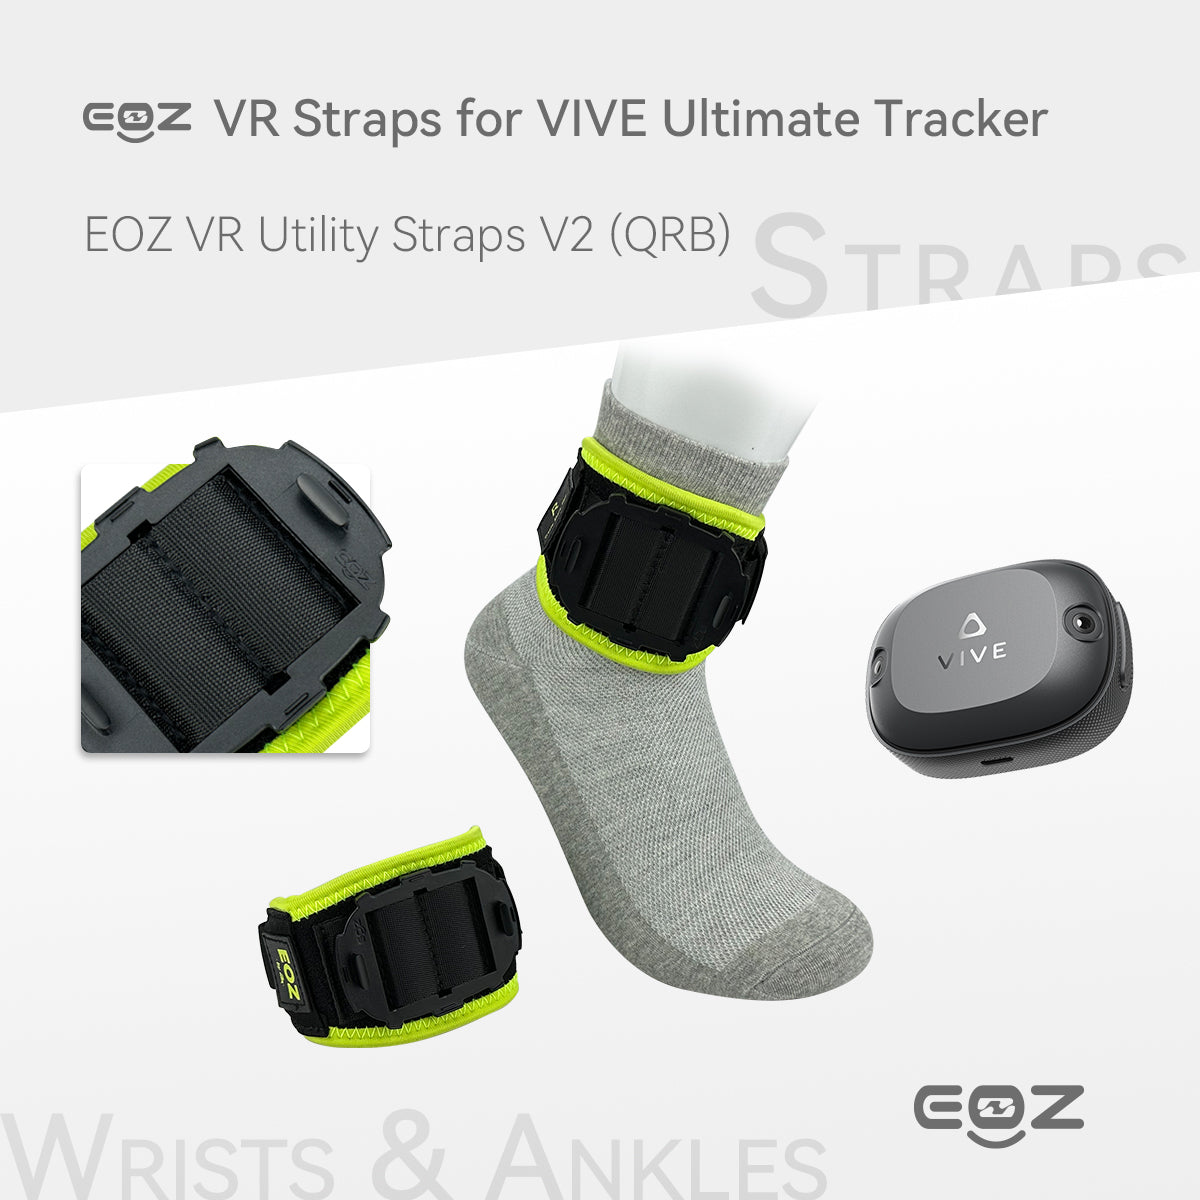 1.1 EOZ VR Straps (QRB) for HTC VIVE Ultimate Tracker